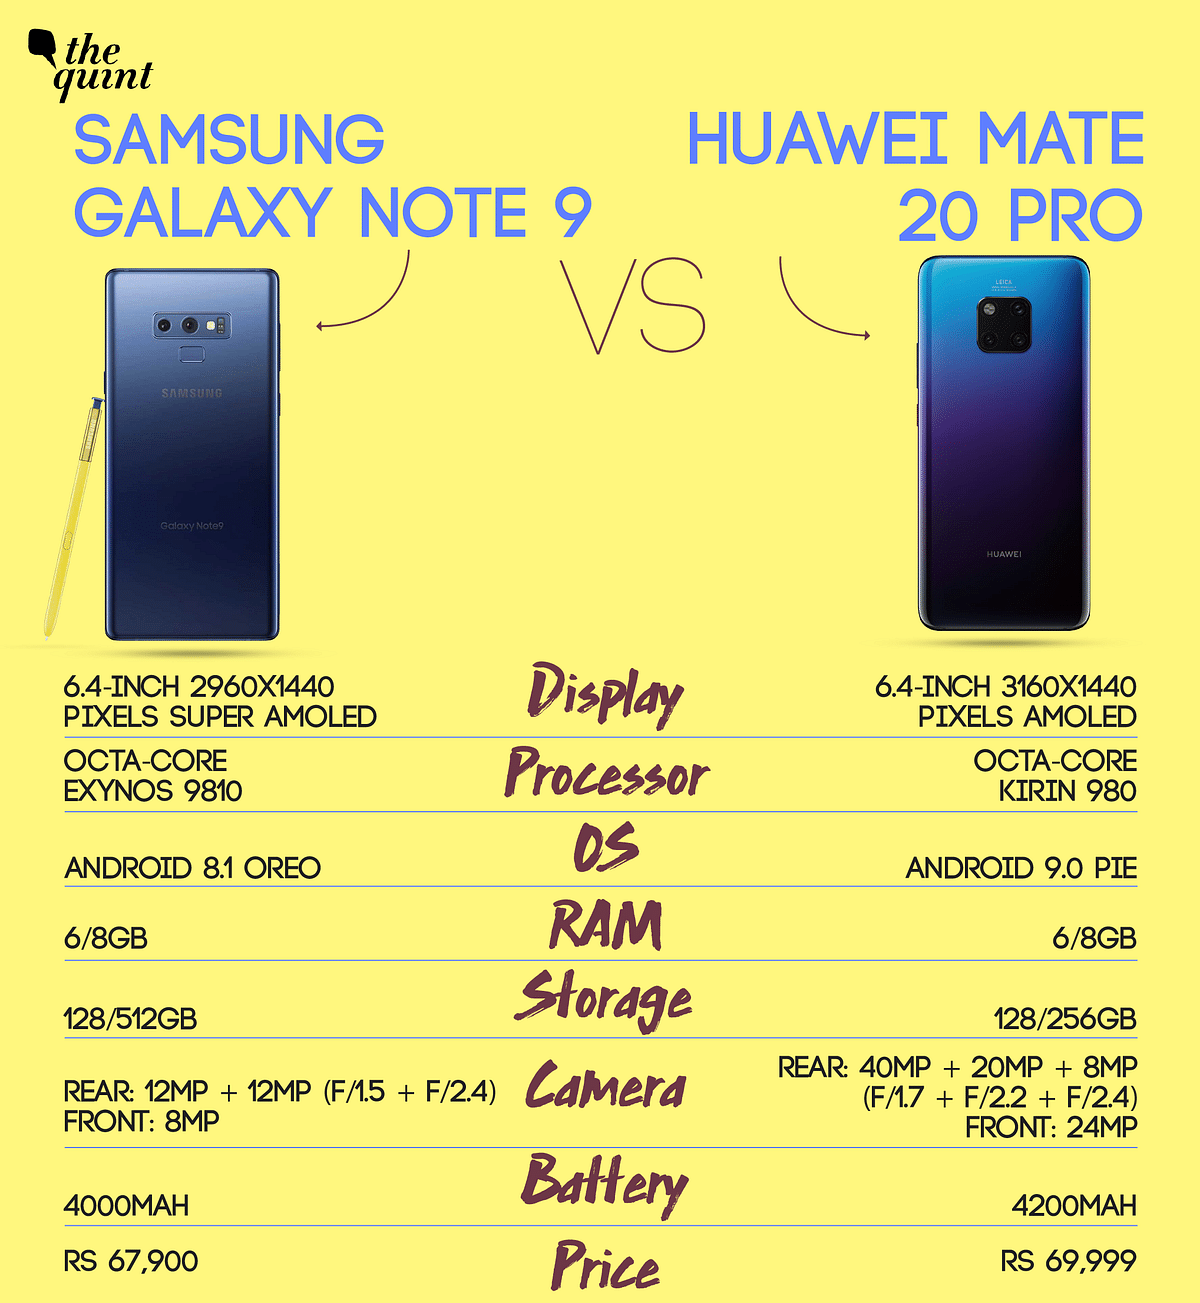 We compare Samsung’s Galaxy Note 9 with the Huawei Mate 20 Pro. Both of these are high-end phones running on Android